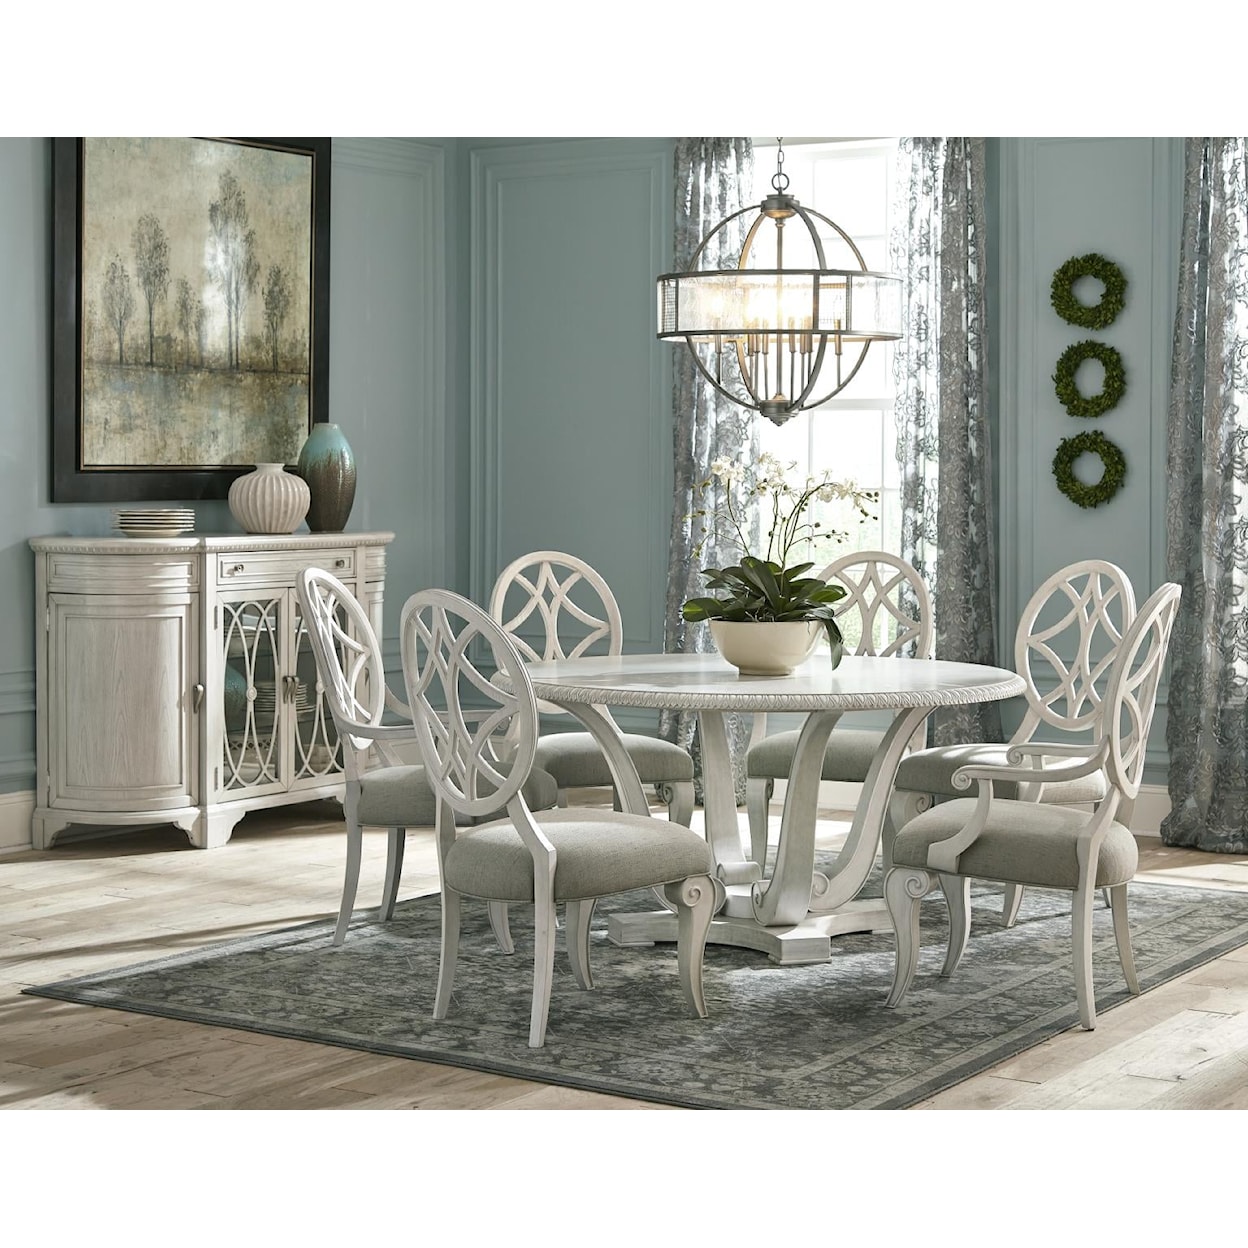 Trisha Yearwood Home Collection by Legacy Classic Jasper County Side Chair